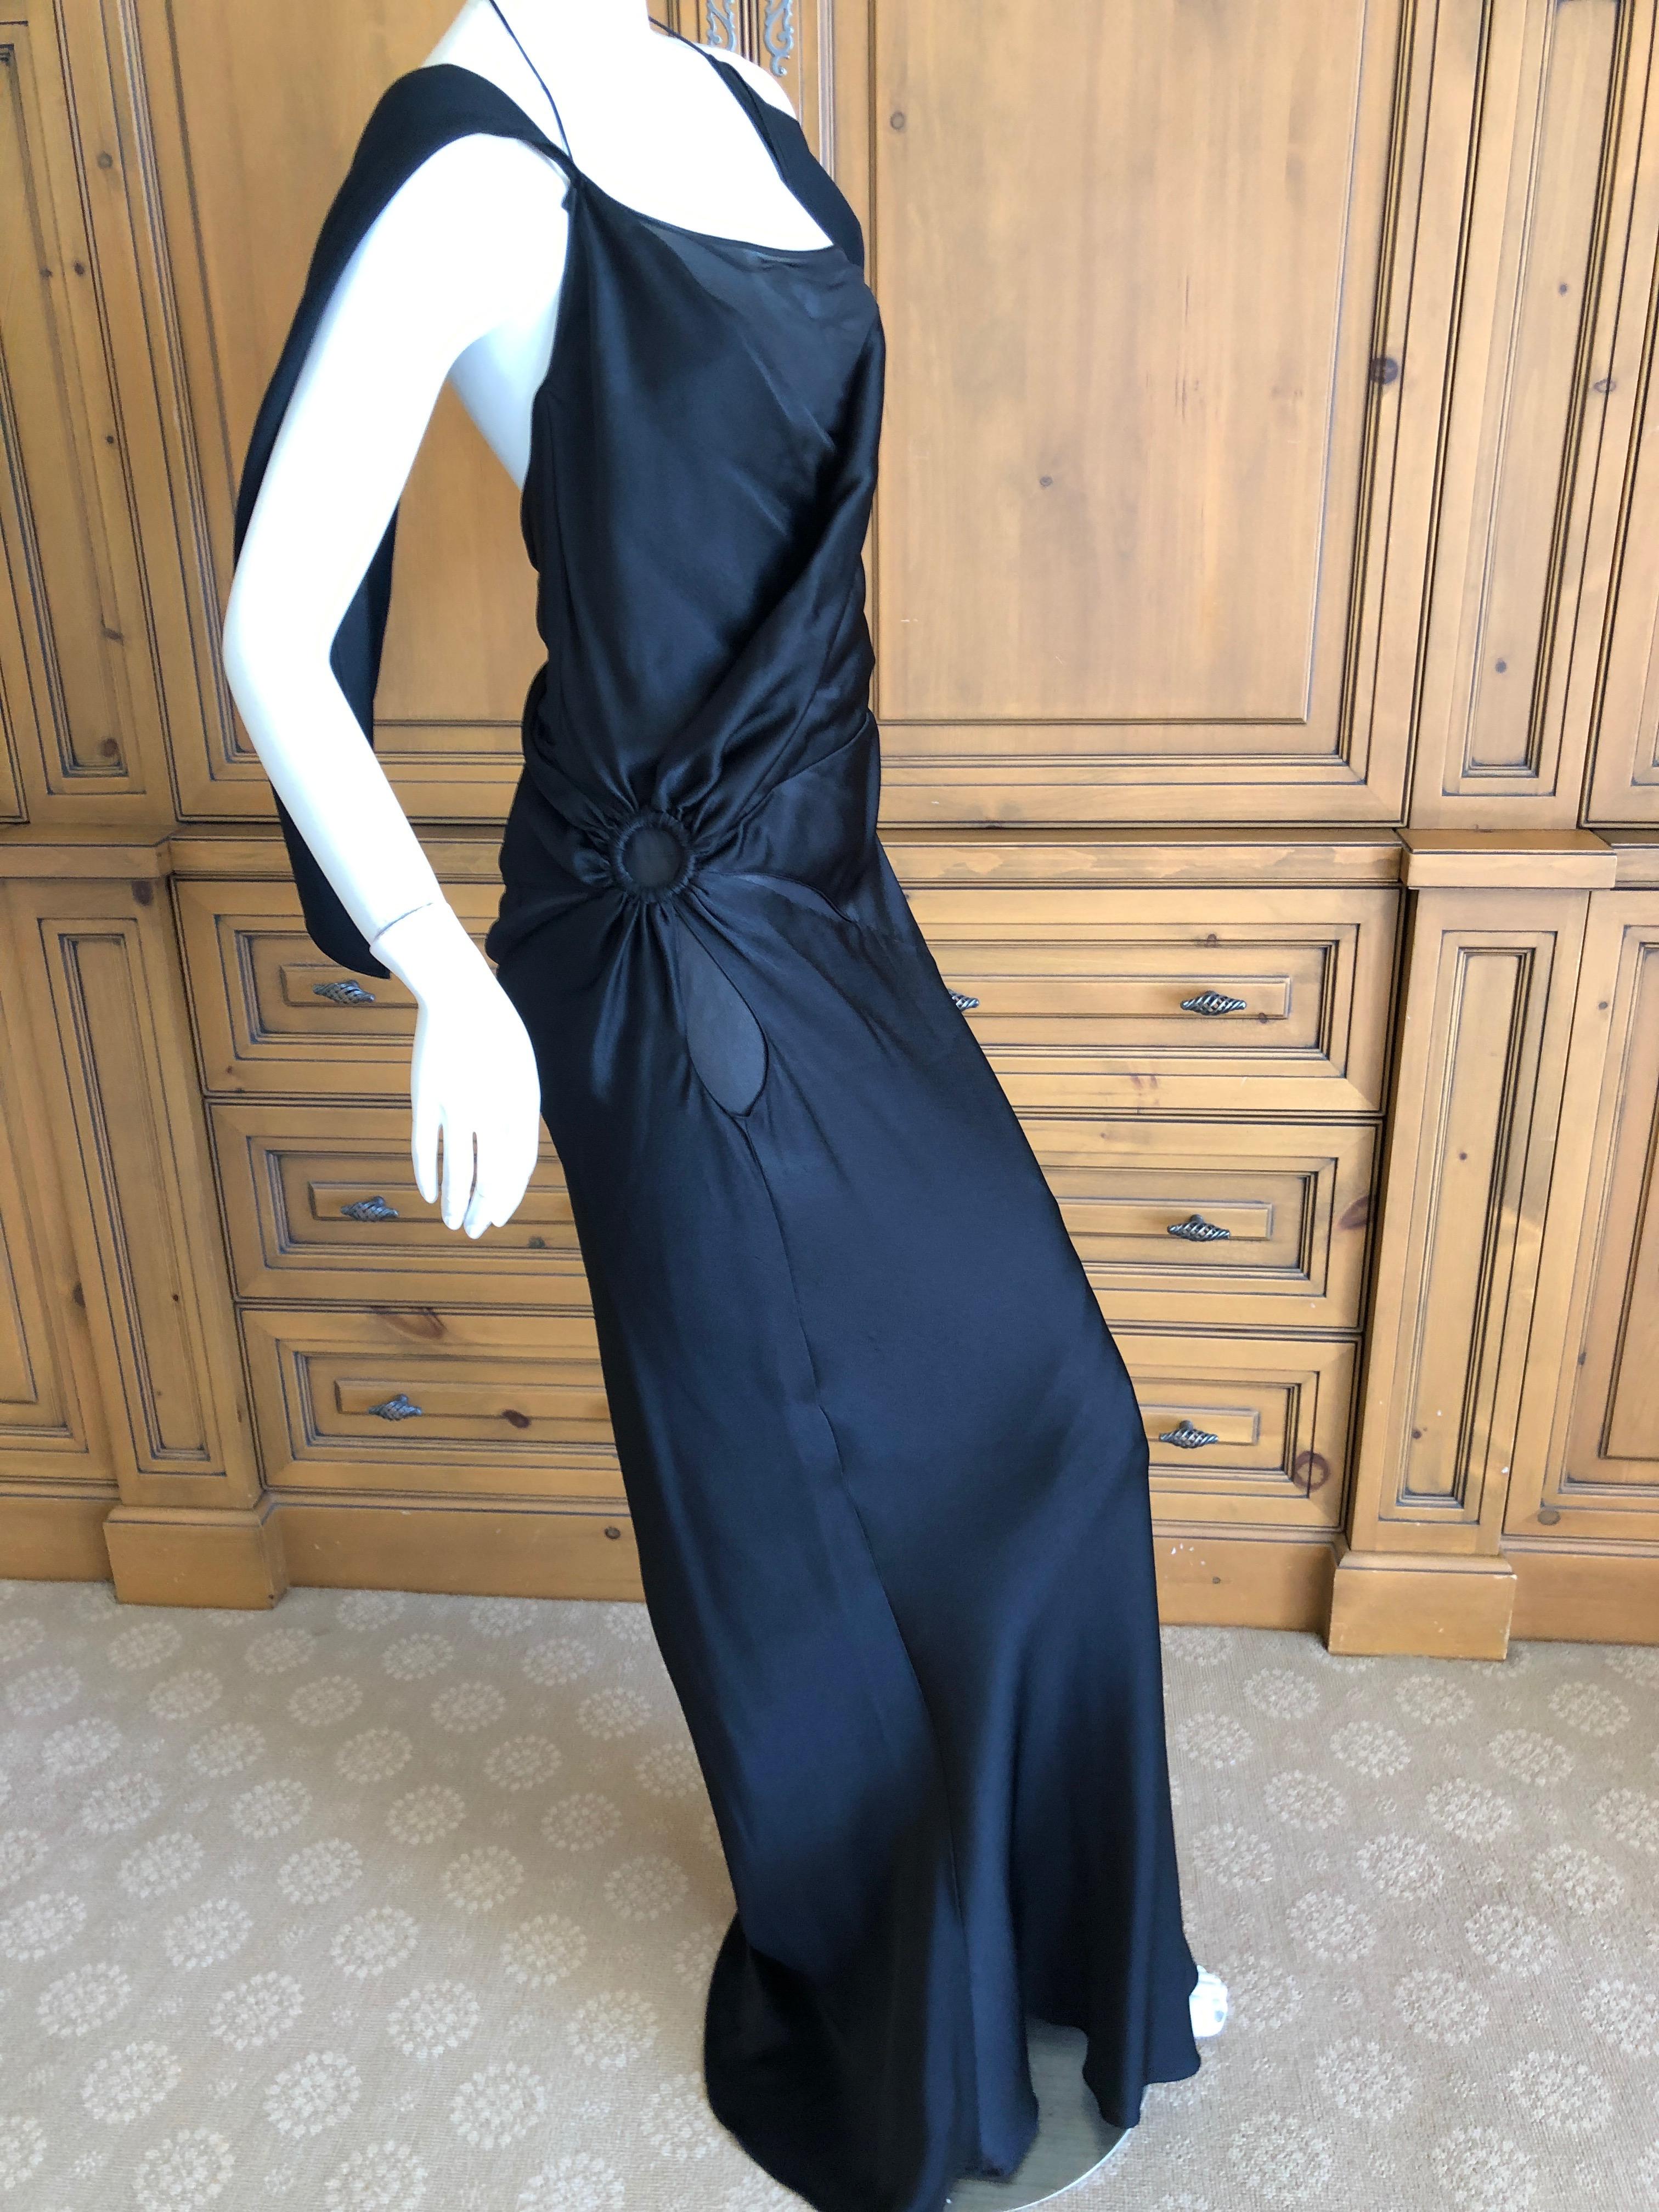 John Galliano Spring 2000 Black Bias Cut Evening Dress with Sheer Inserts Sz 42 For Sale 1